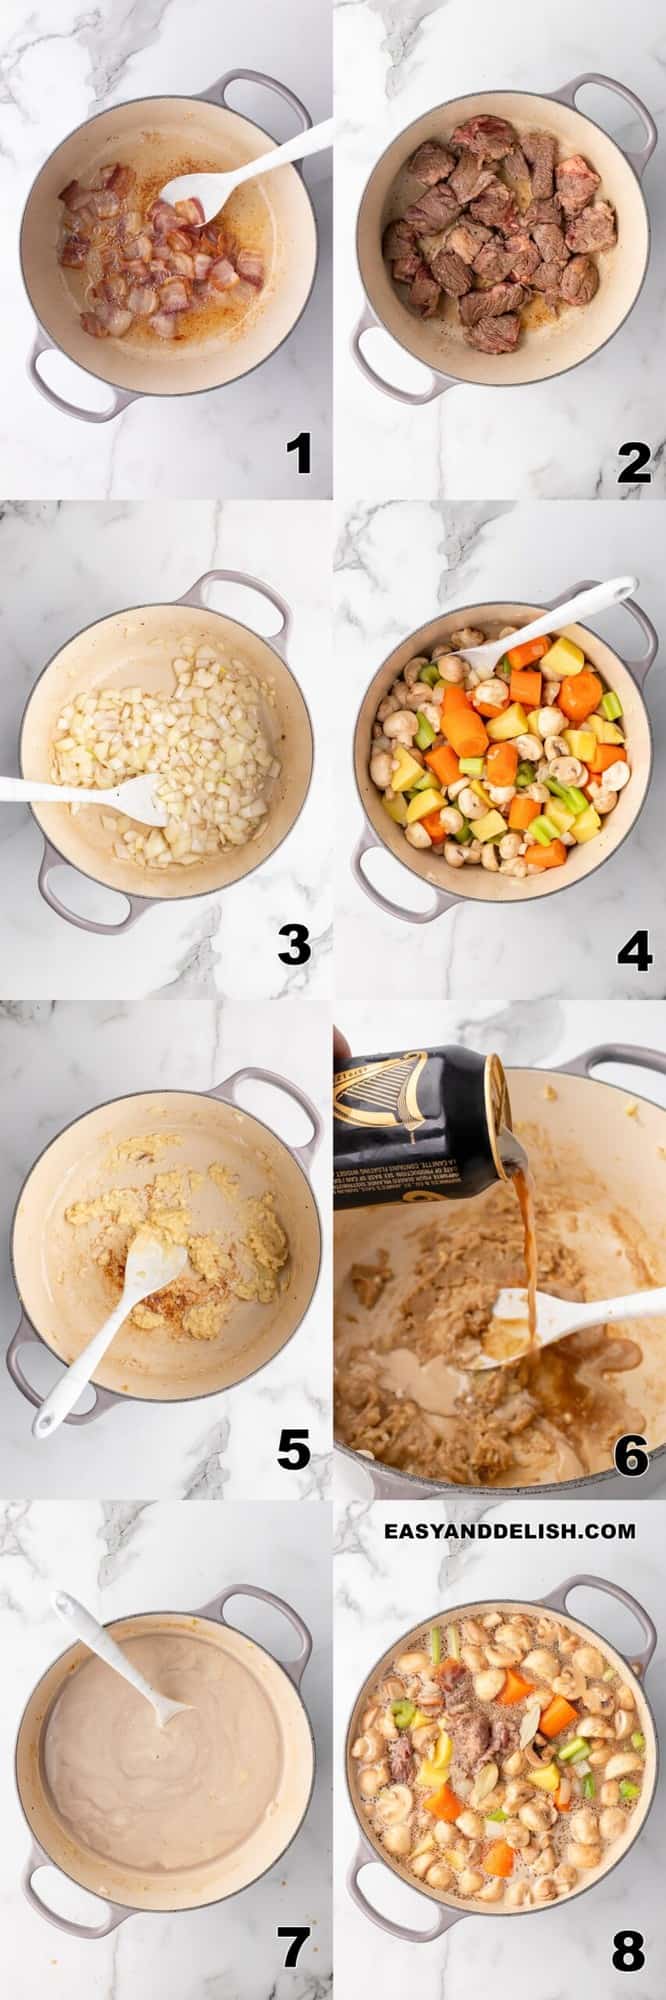 phptp collage showing recipe steps